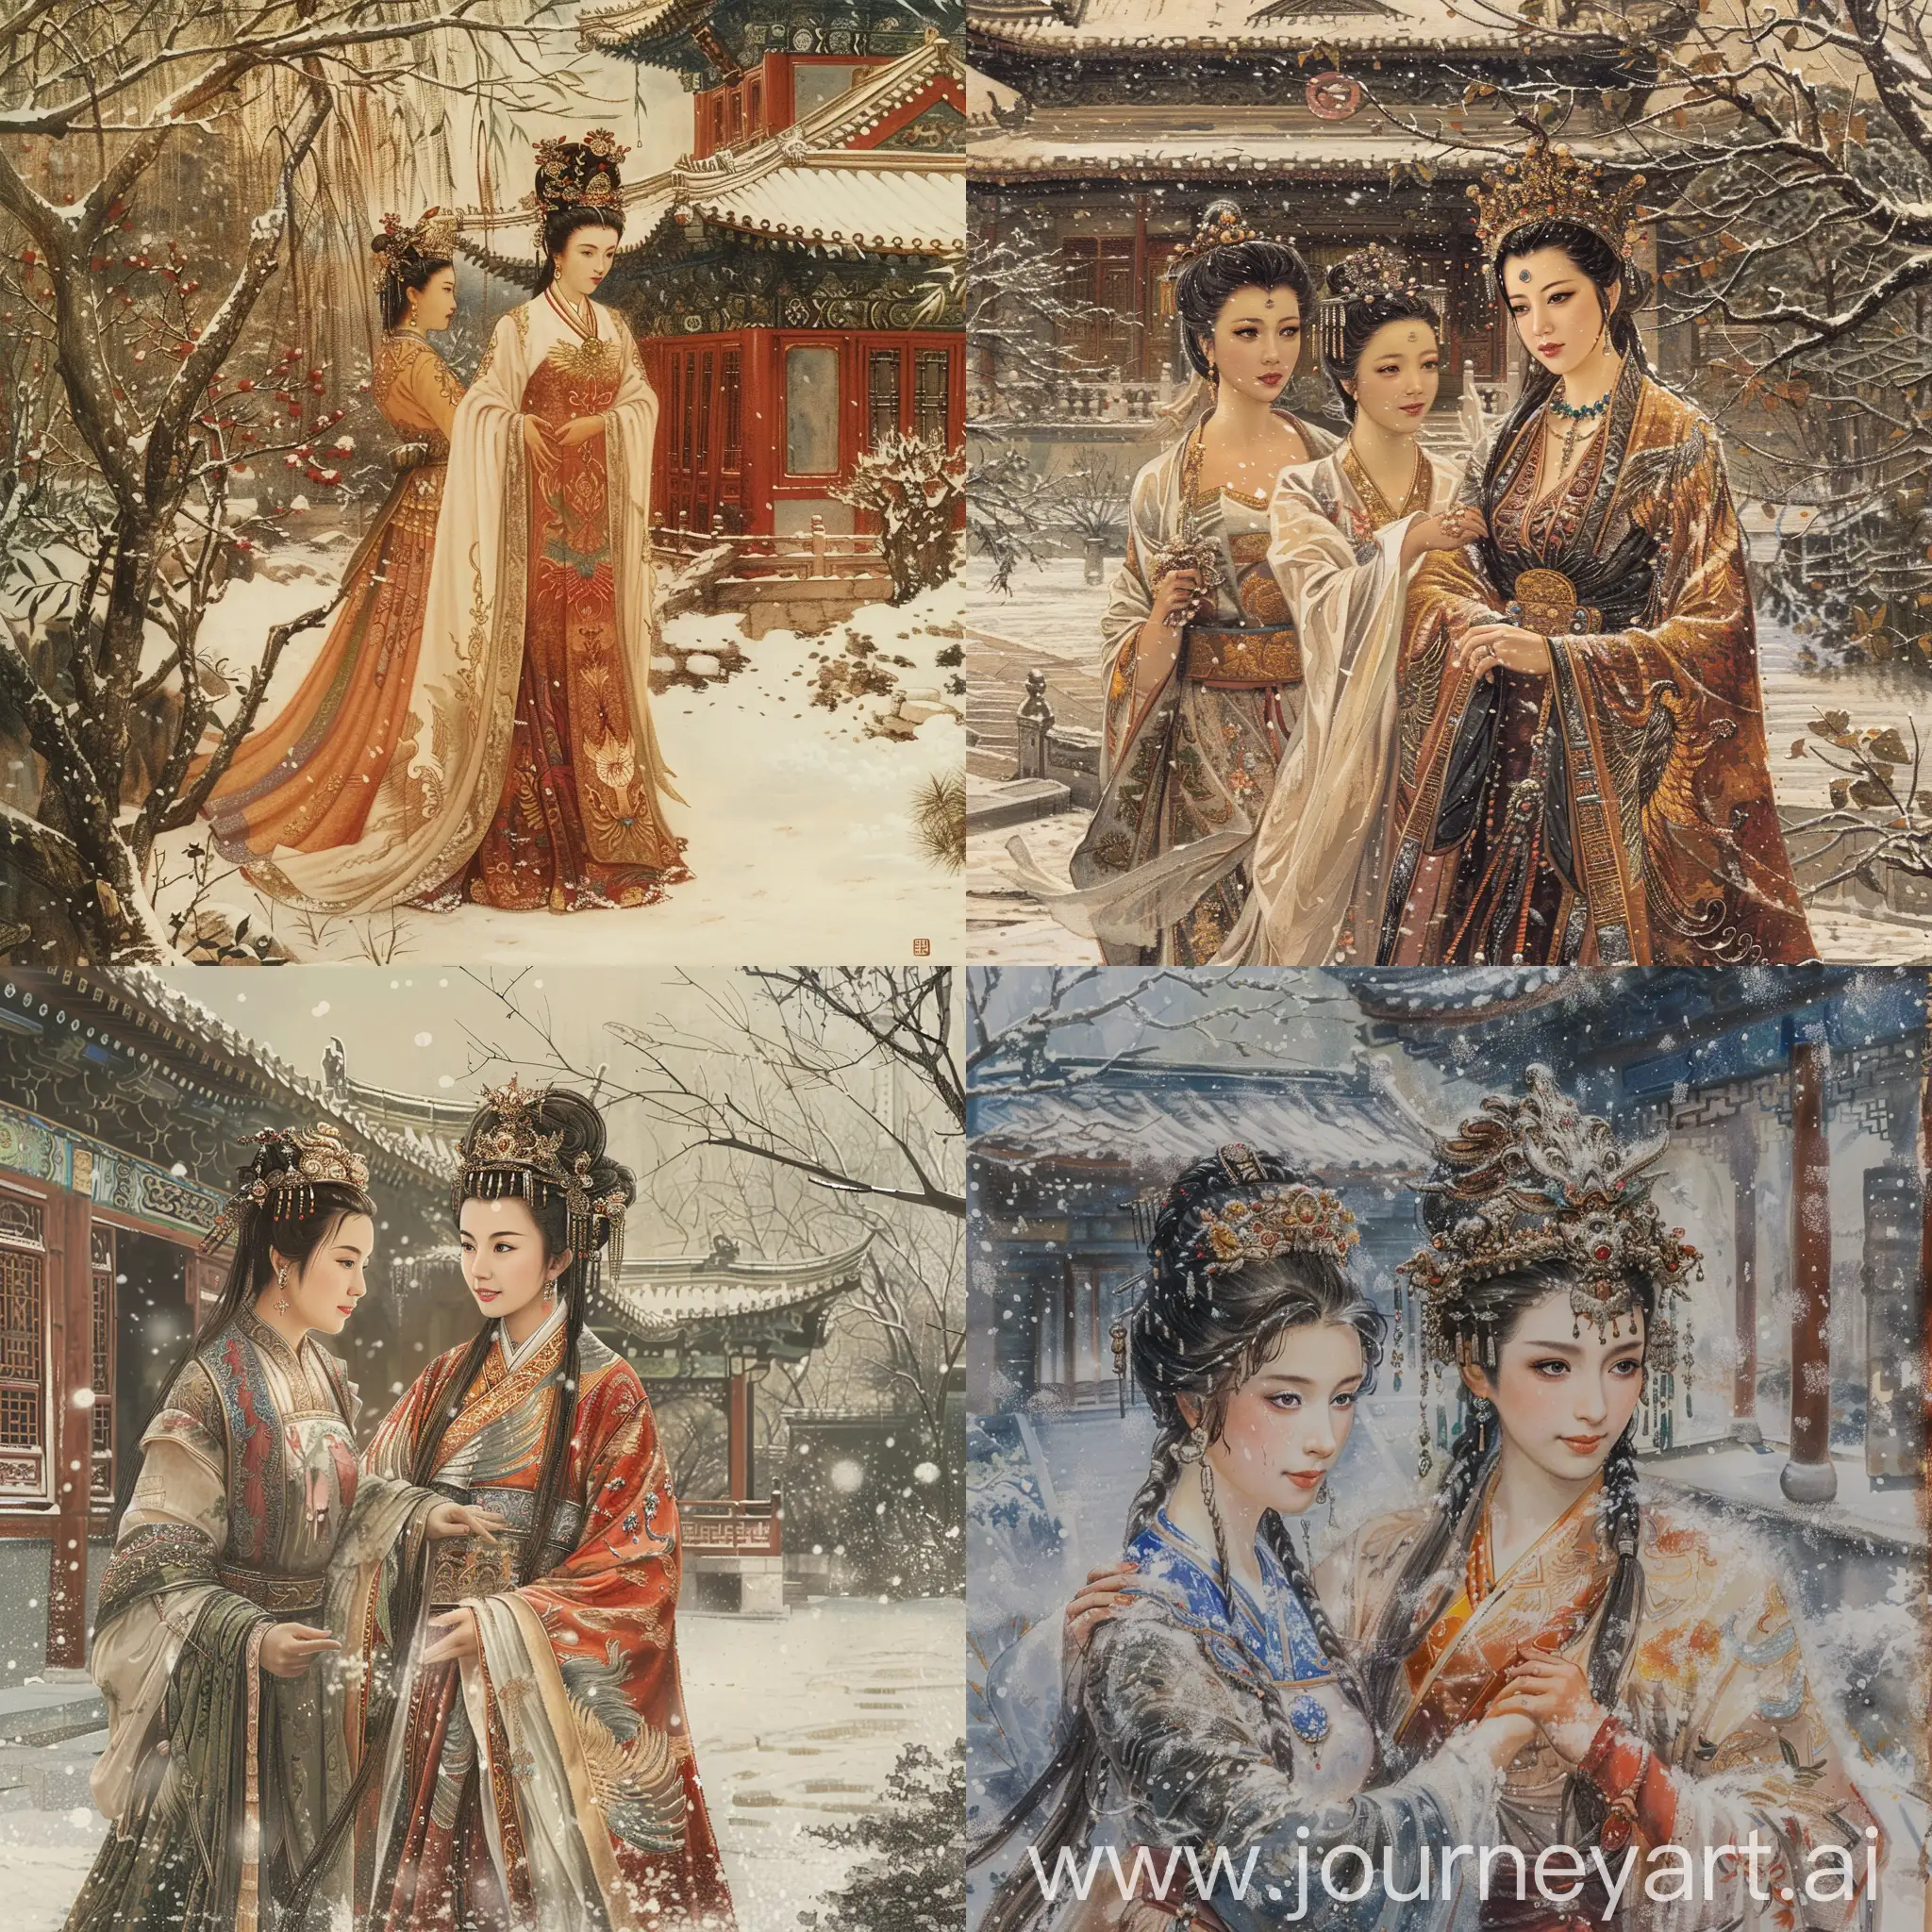 Chinese-Empress-and-Maid-Enjoying-Snow-in-Imperial-Garden